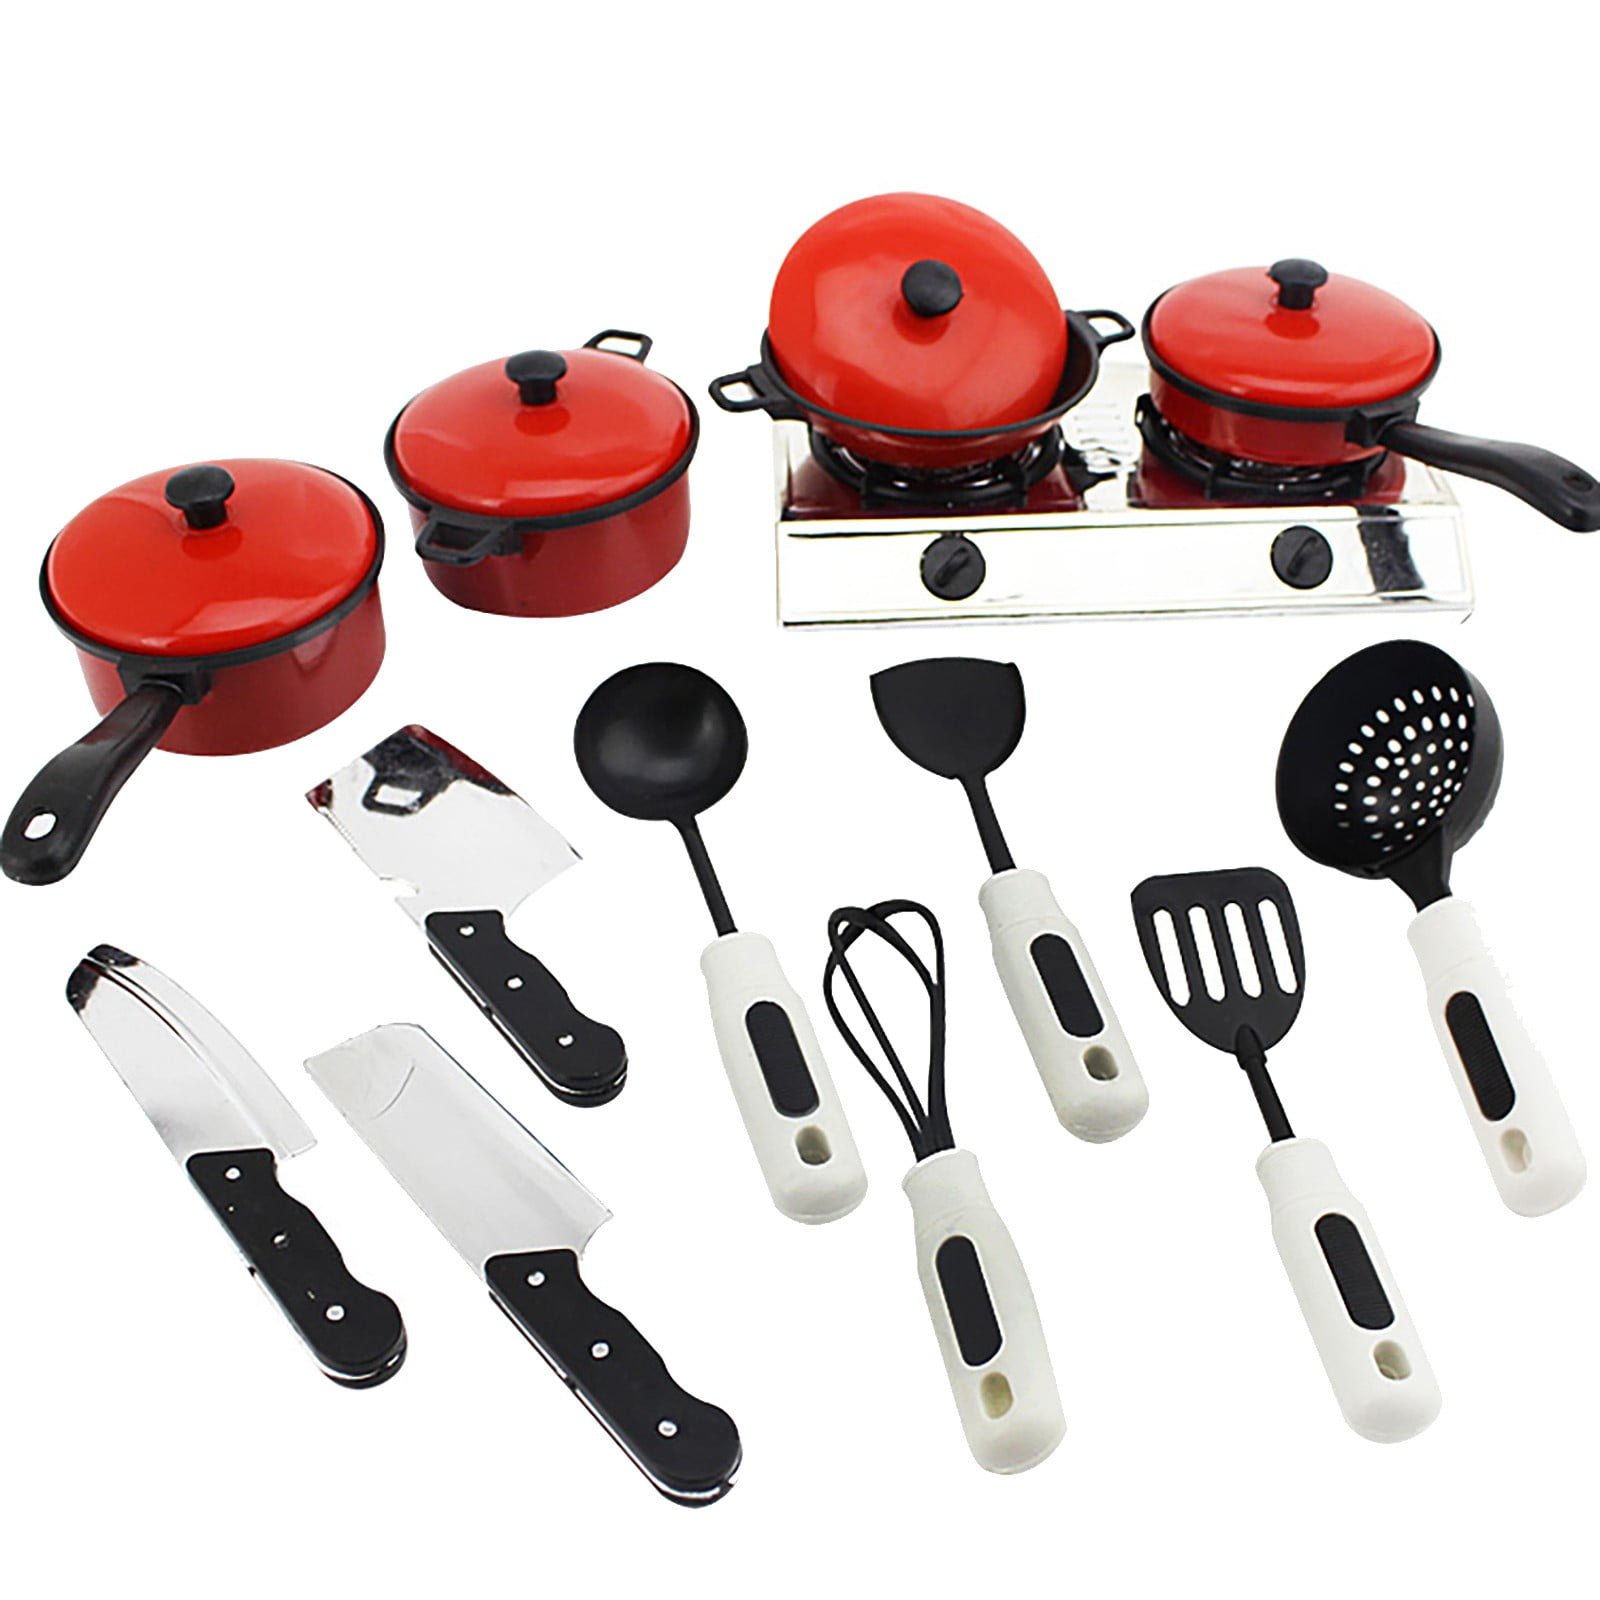 13pc/set Kid Child Play House Kitchen Cooking Utensils Dishes Cookware Toy DEKOR 